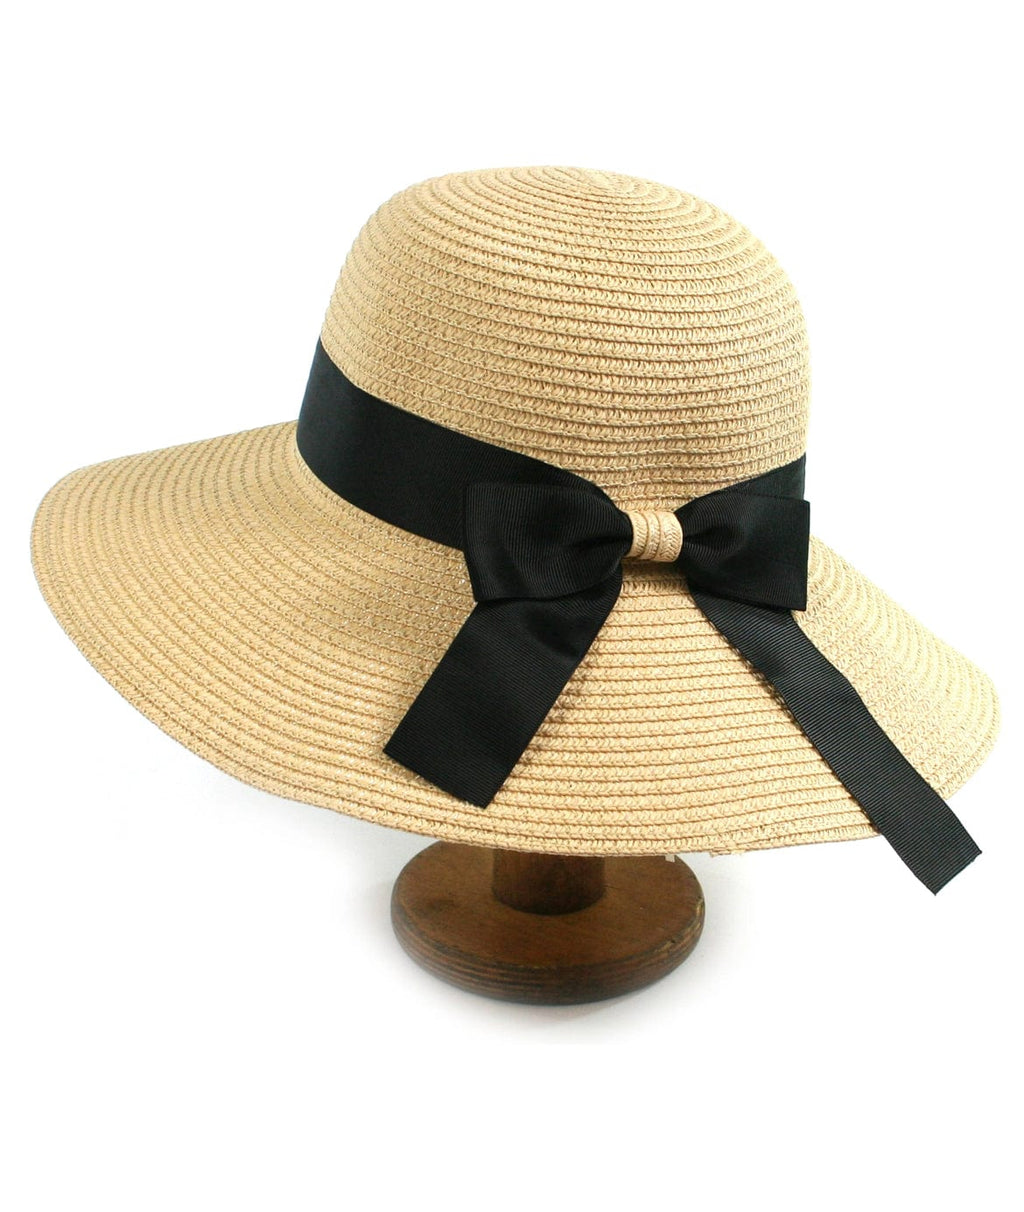 lusciousscarves Hats Ladies Cream Foldable Rollable Sun Hat with Black Bow Design and Bag